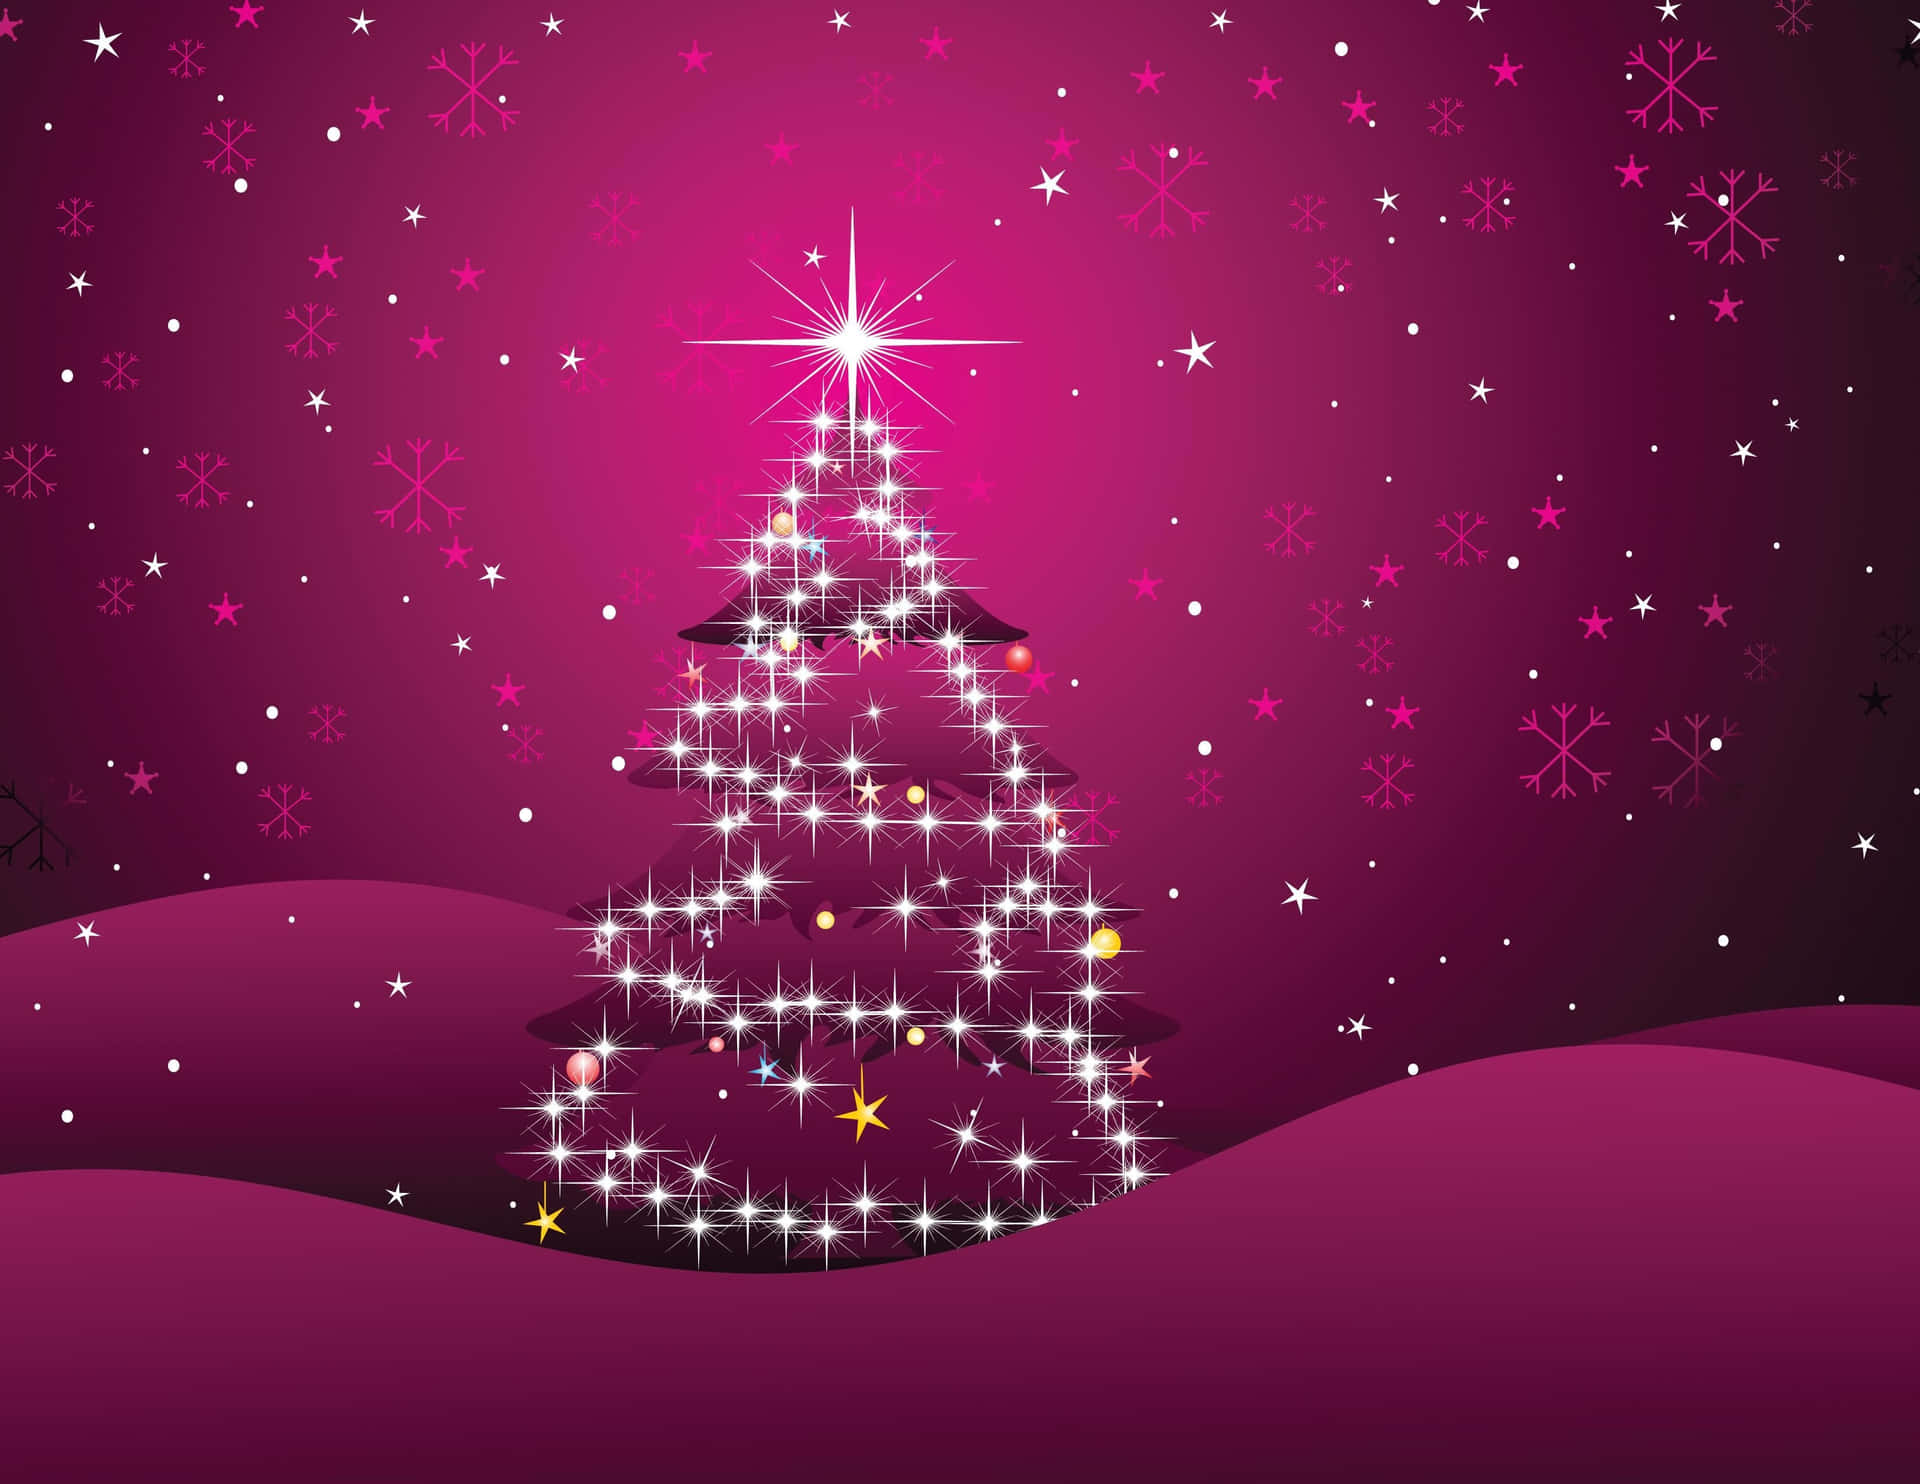 A pink and festive Christmas tree to spread holiday cheer. Wallpaper